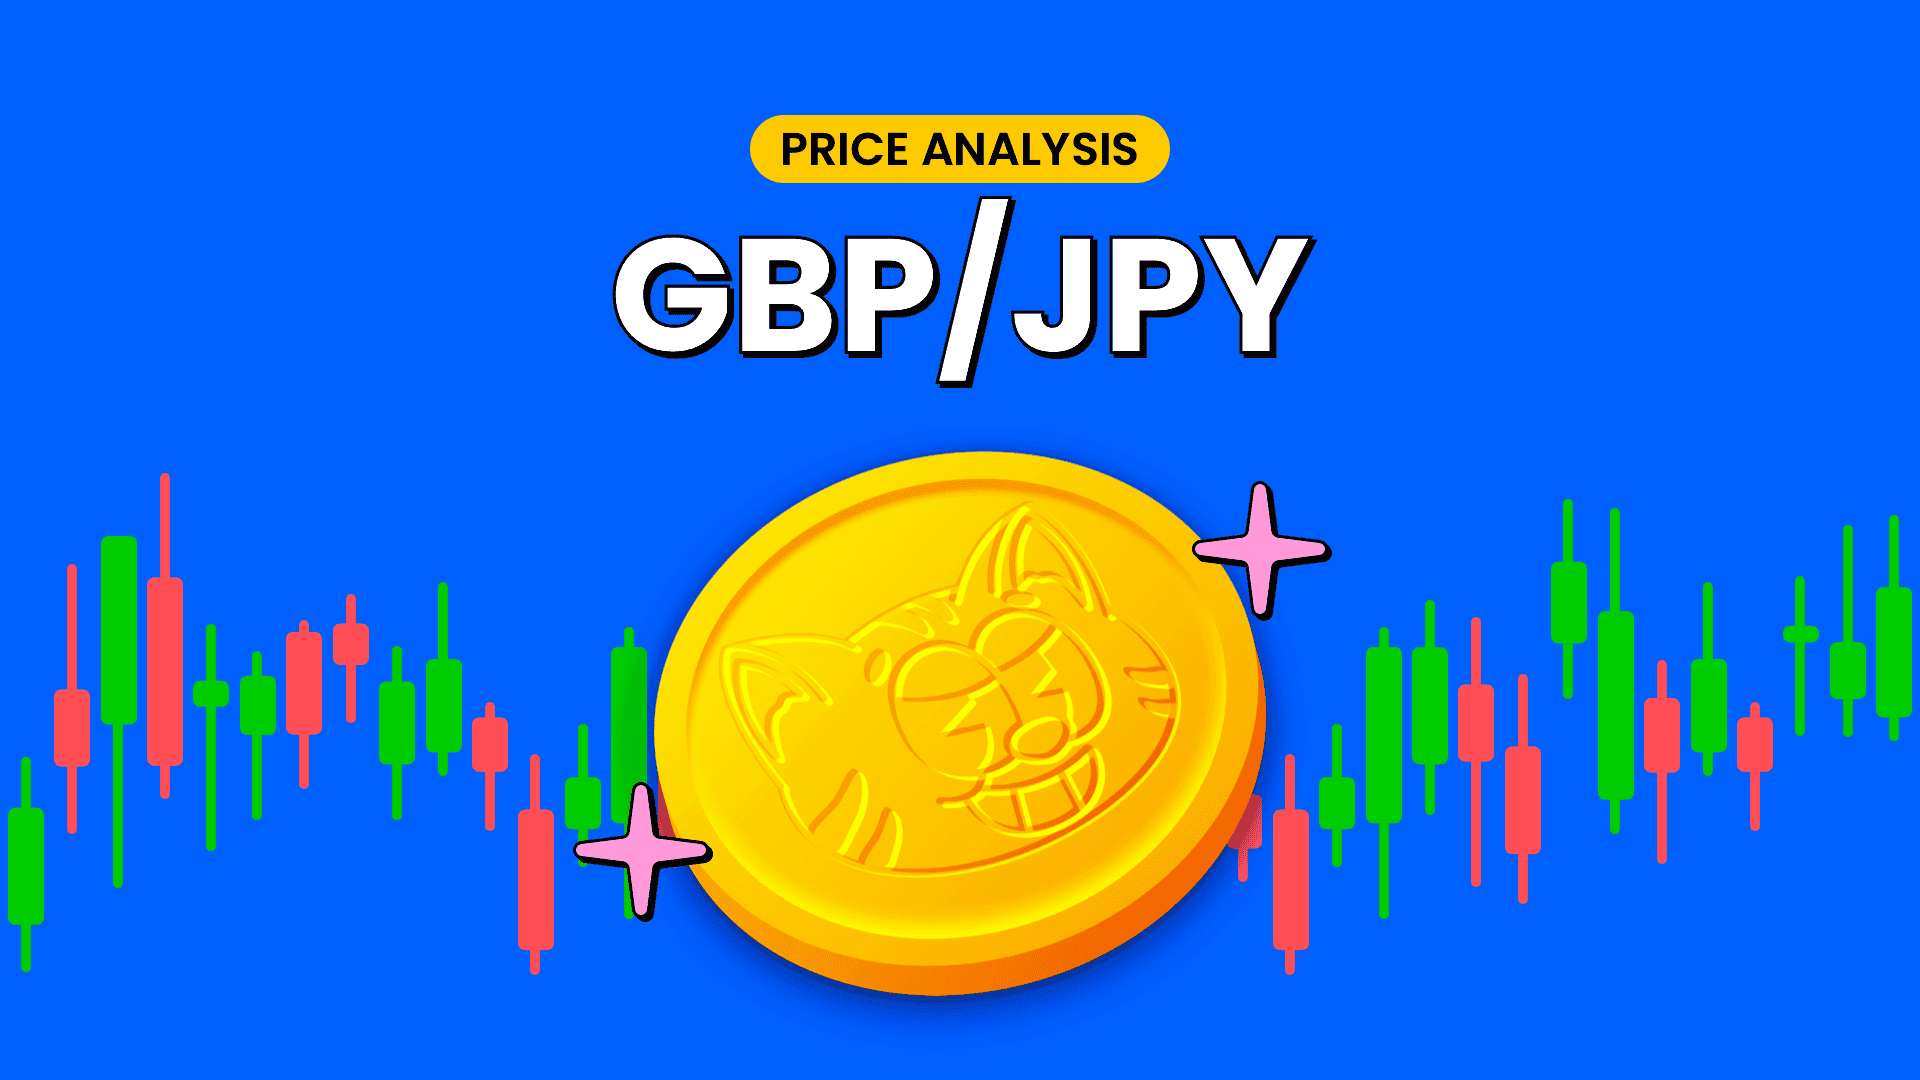 GBPJPY-Seems-Vulnerable-After-Hot-UK-Inflation-UKs-Retail-Sales-Data-Awaited-Feature-Image-2vkwG.png